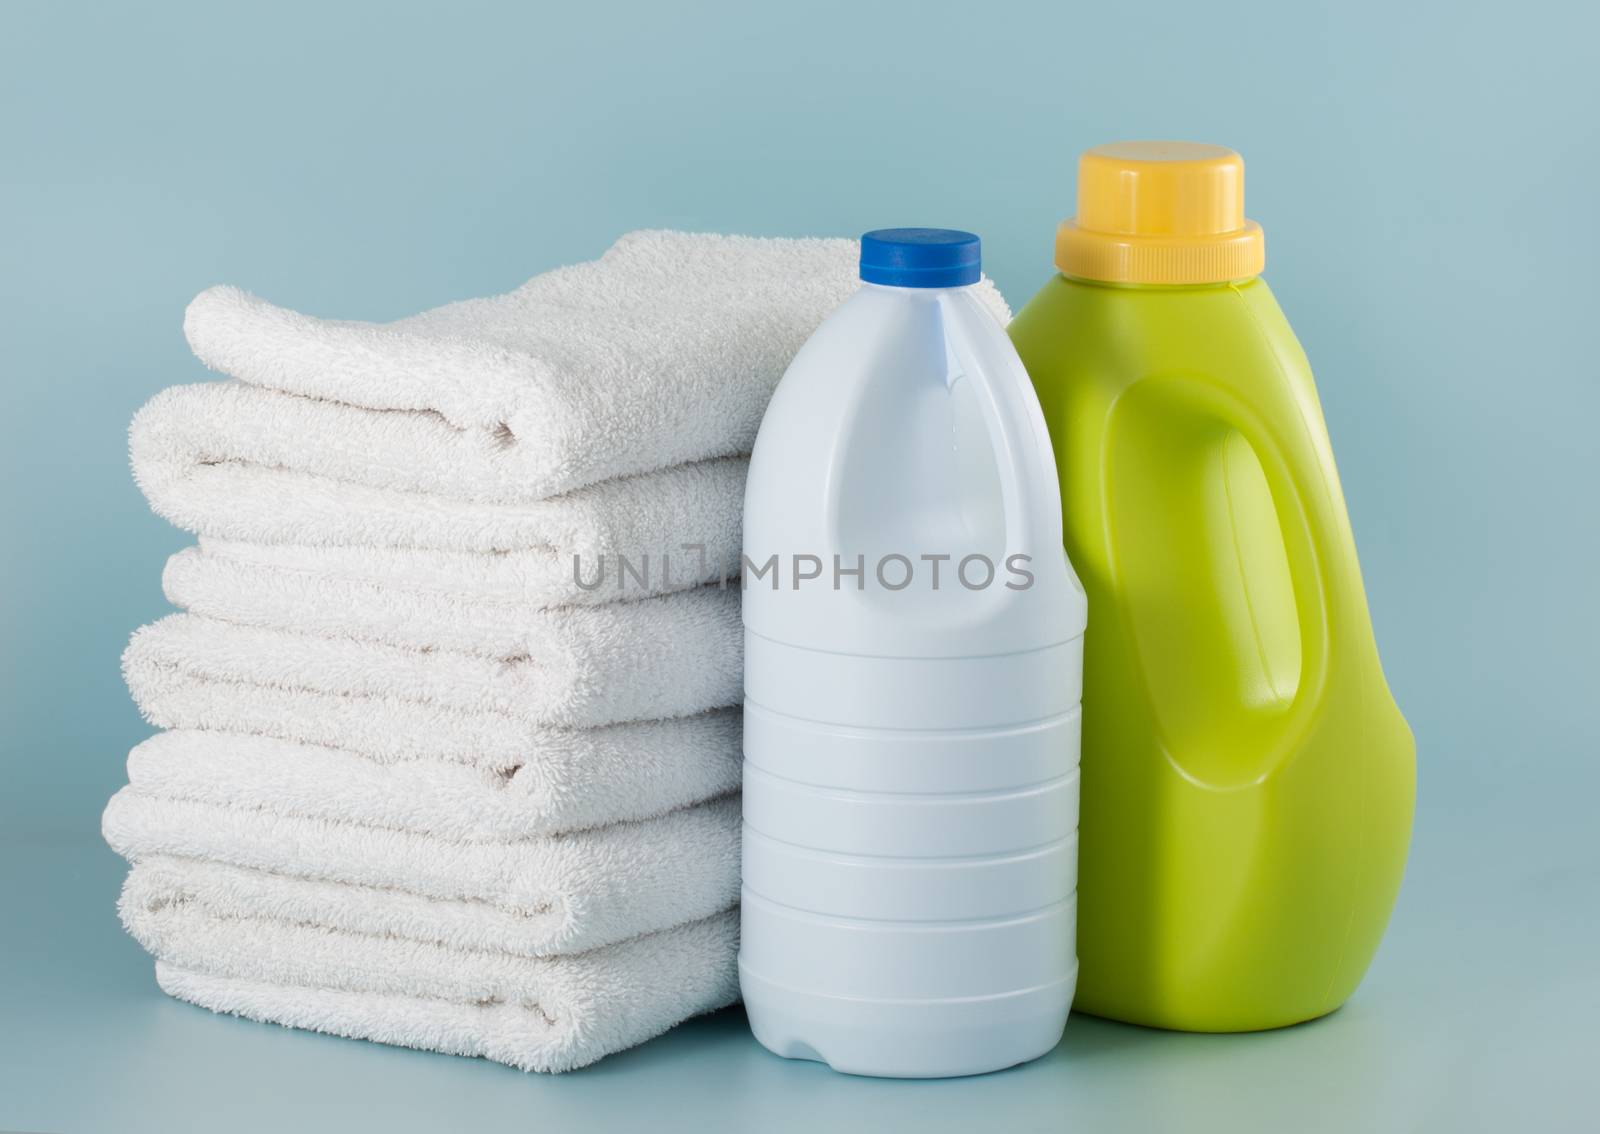 laundry detergent and bleach bottles by lanalanglois